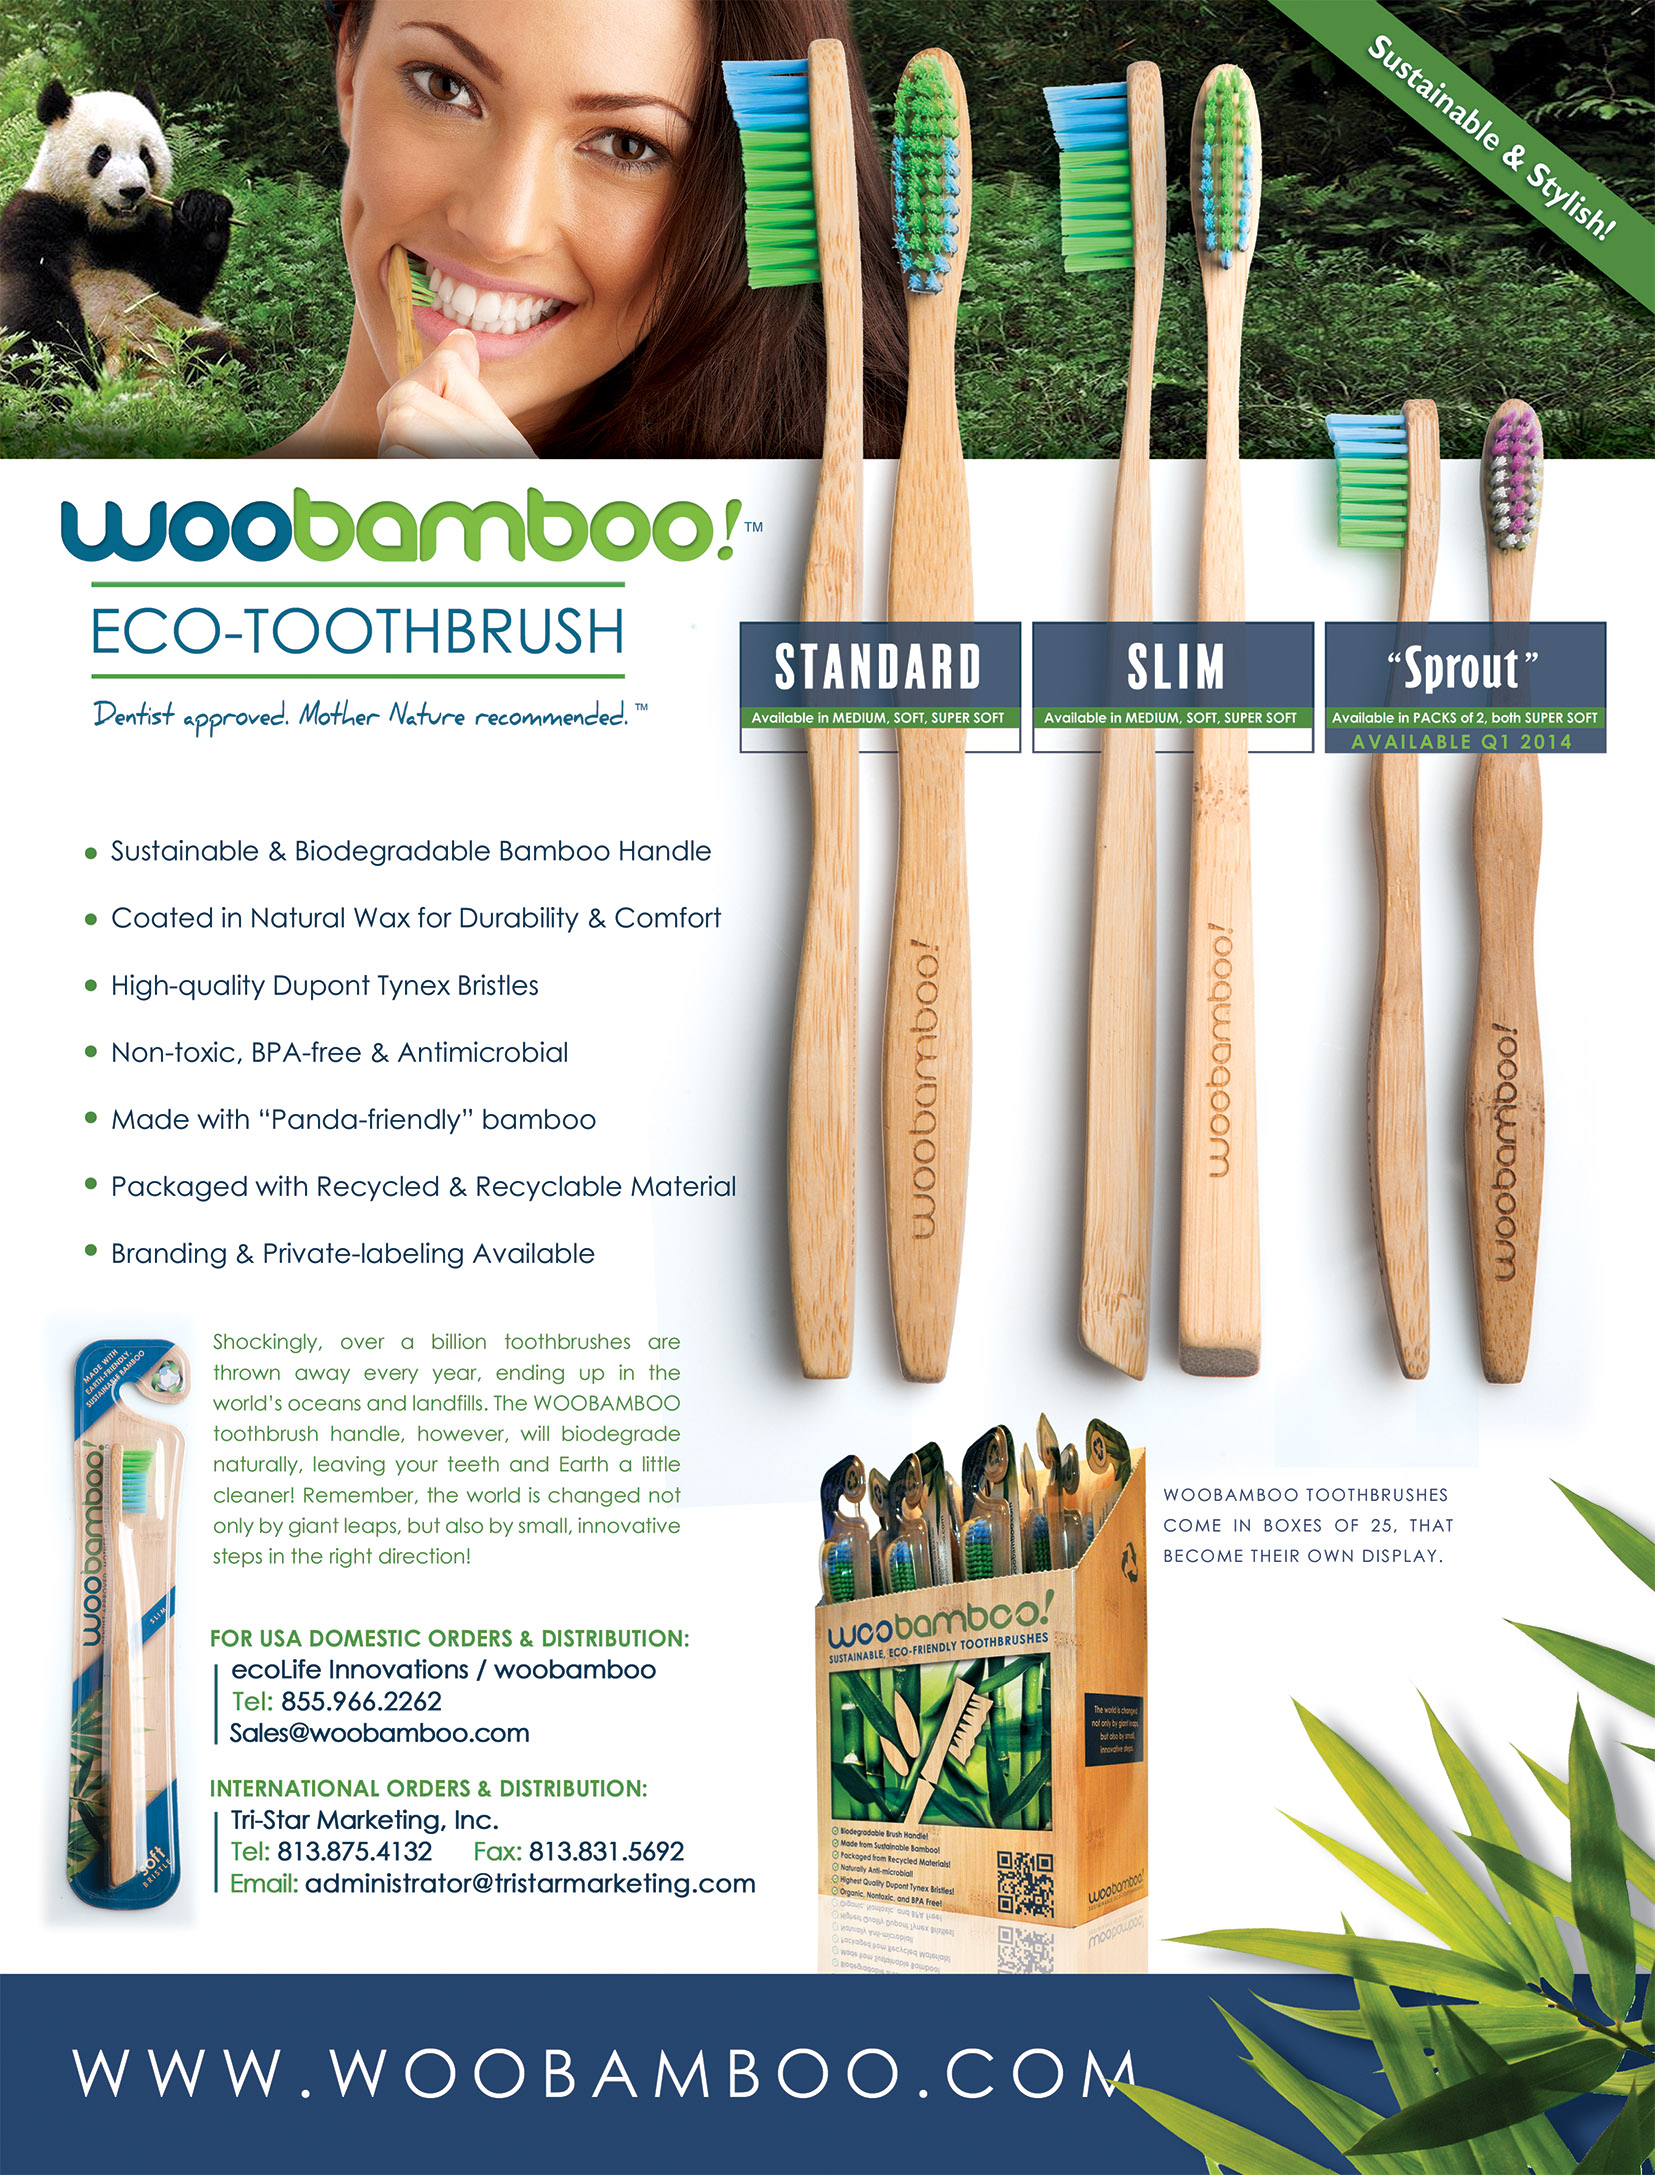 WooBamboo's Product Line